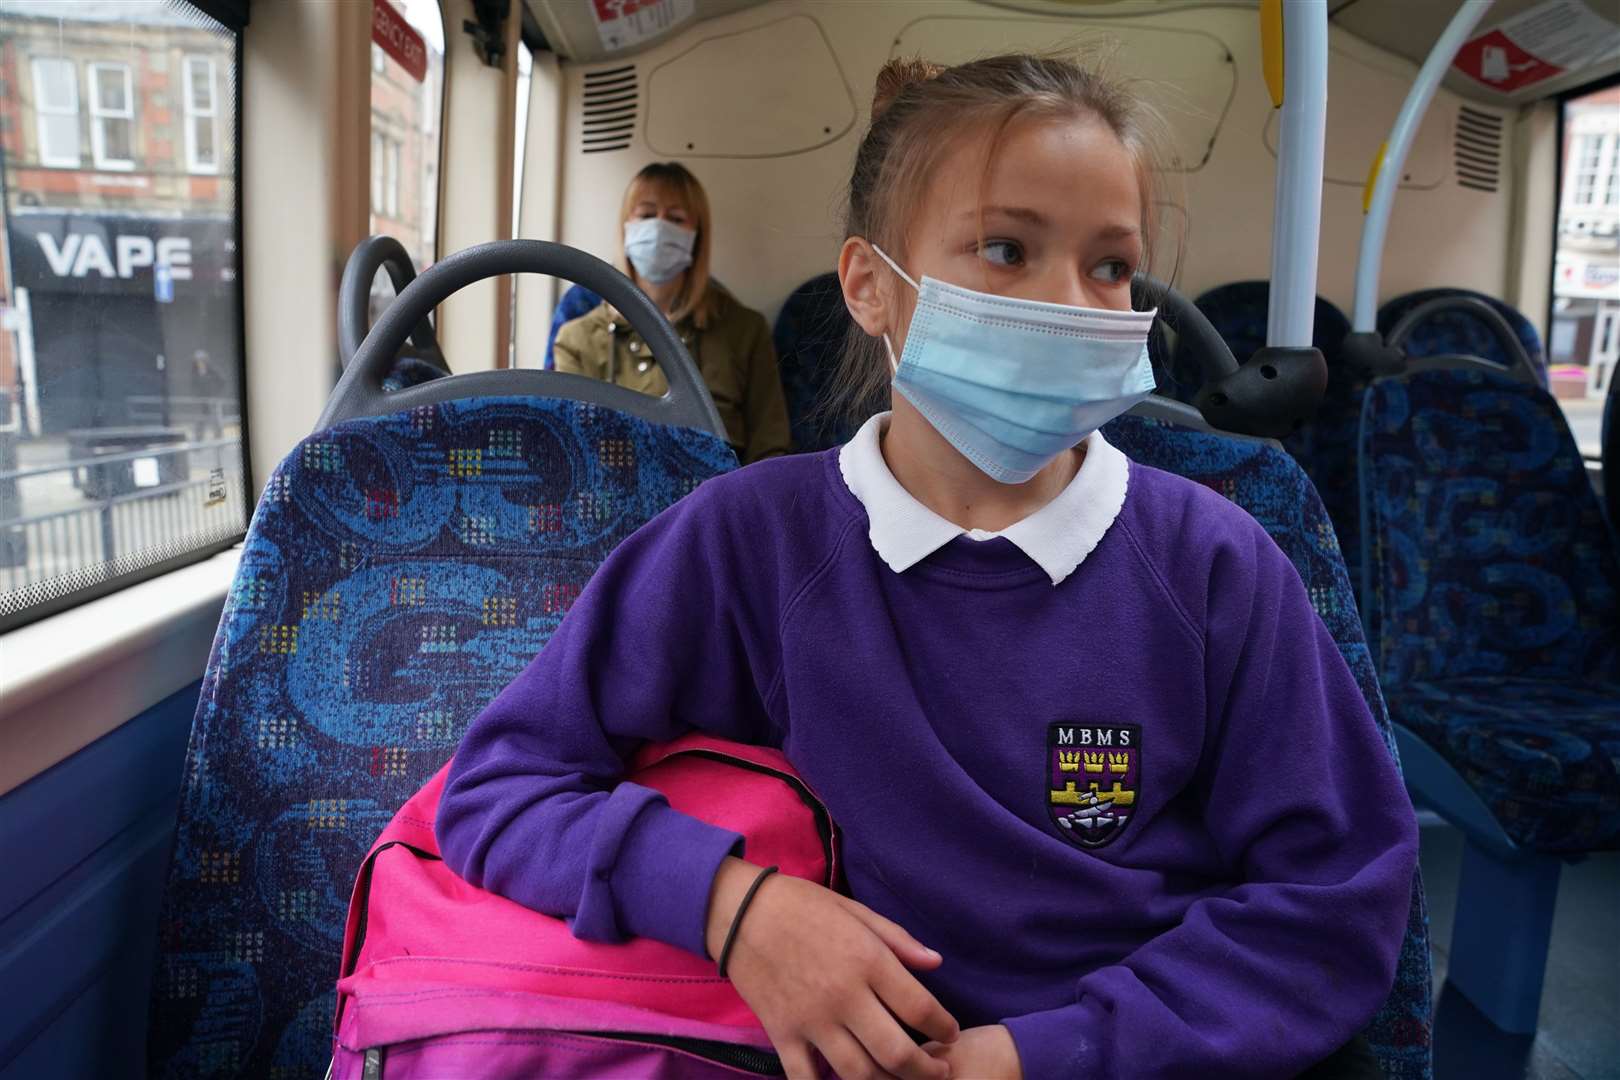 A school pupil wearing a face mask (PA)